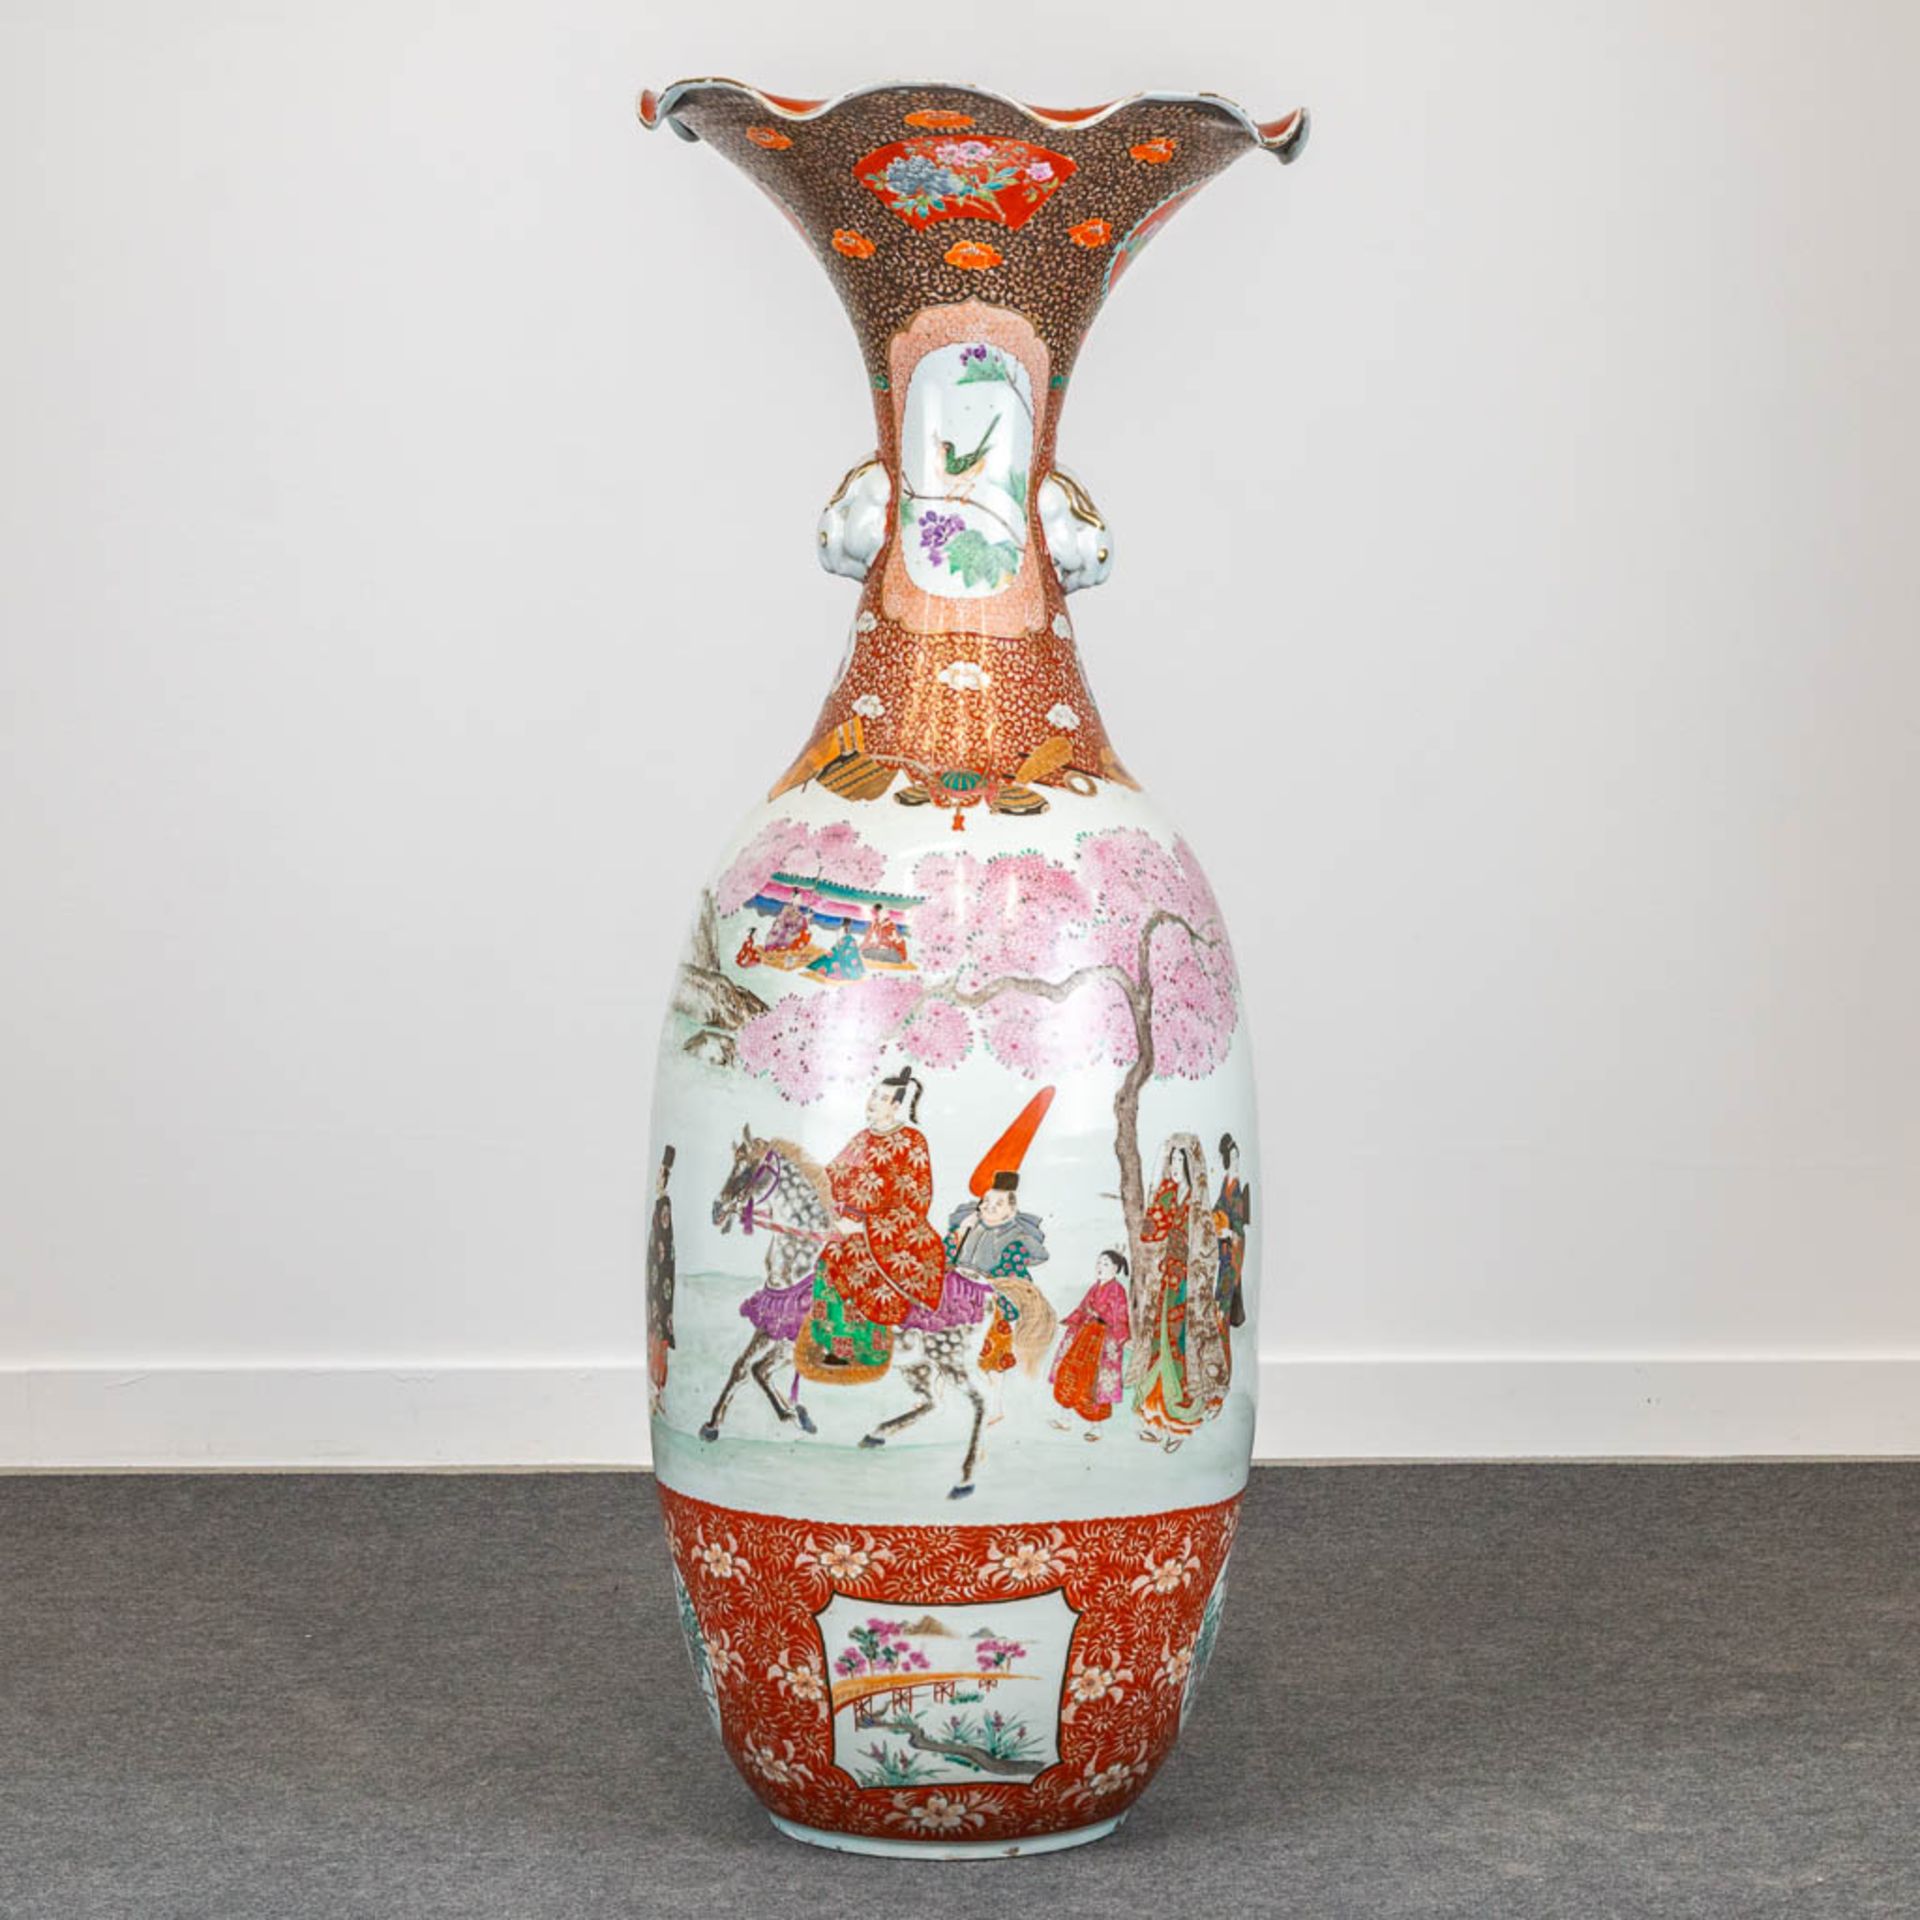 A large vase made of Japansese porcelain, decorated with blossoms. 19th/20th century. (106 x 40 cm)